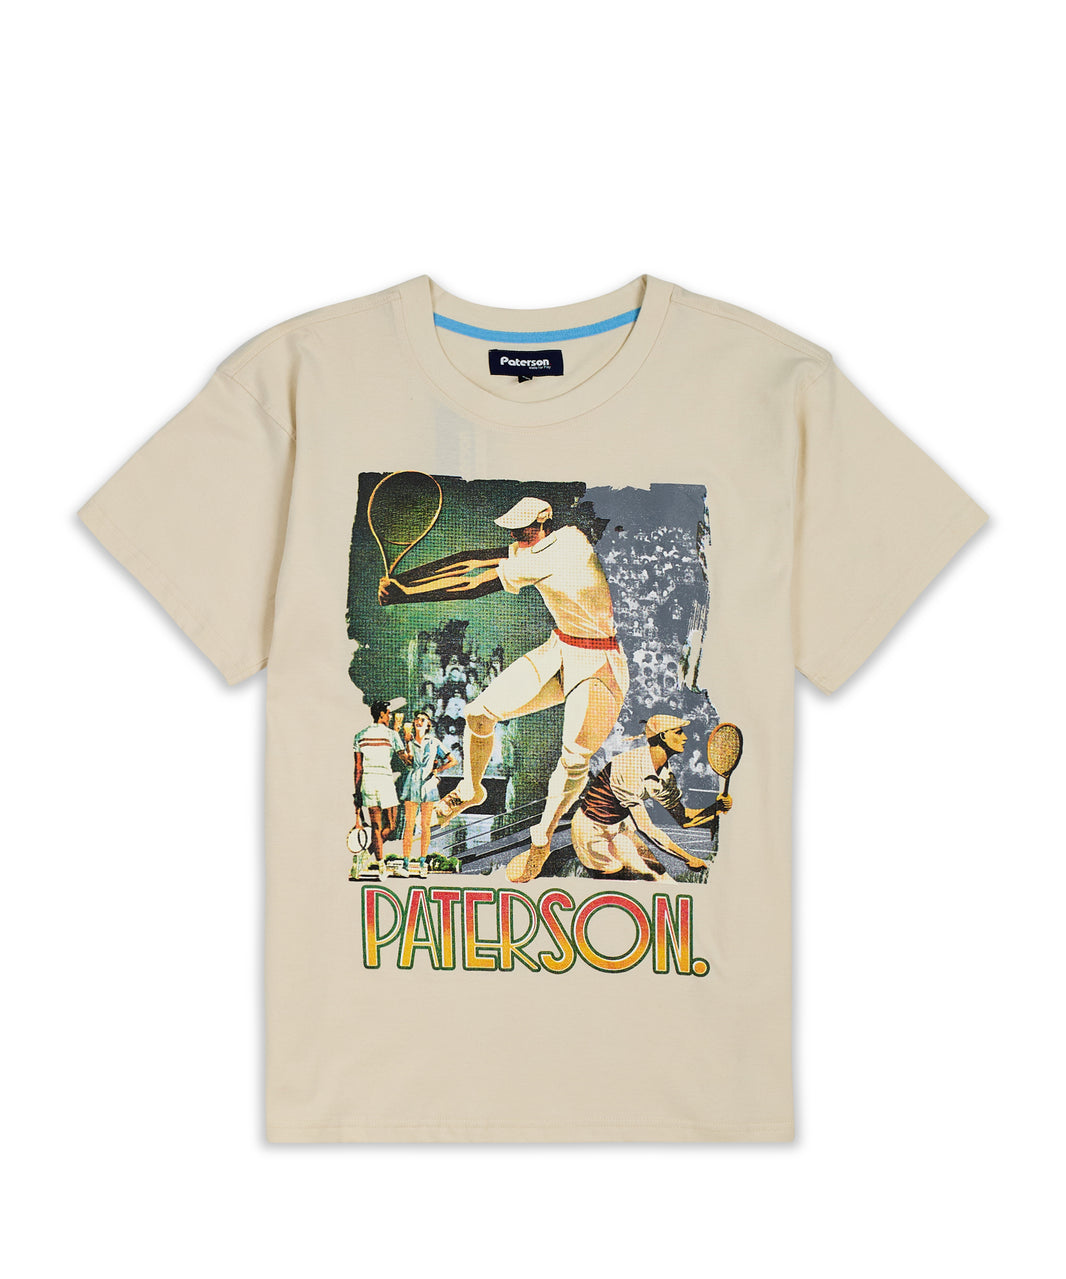 MADE FOR PLAY. – Paterson League